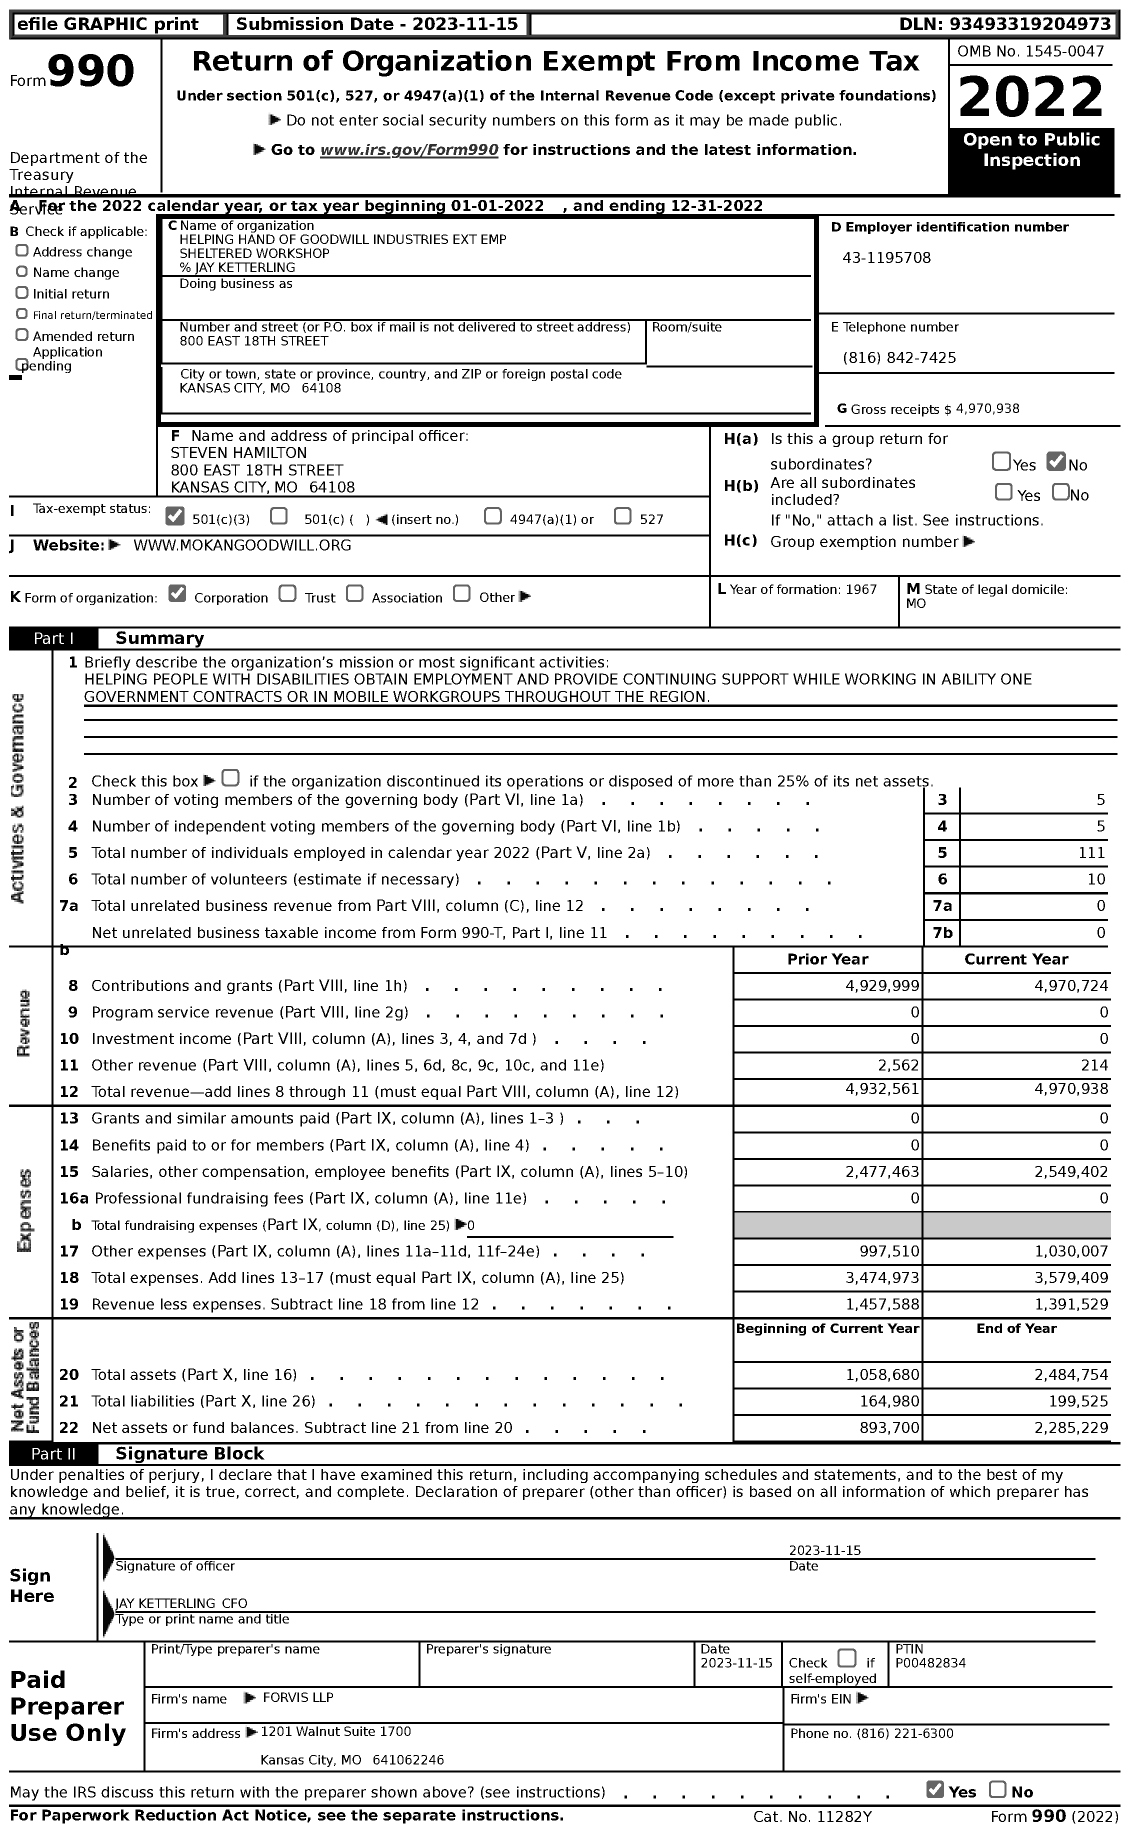 Image of first page of 2022 Form 990 for Helping Hand of Goodwill Industries Ext Emp Sheltered Workshop